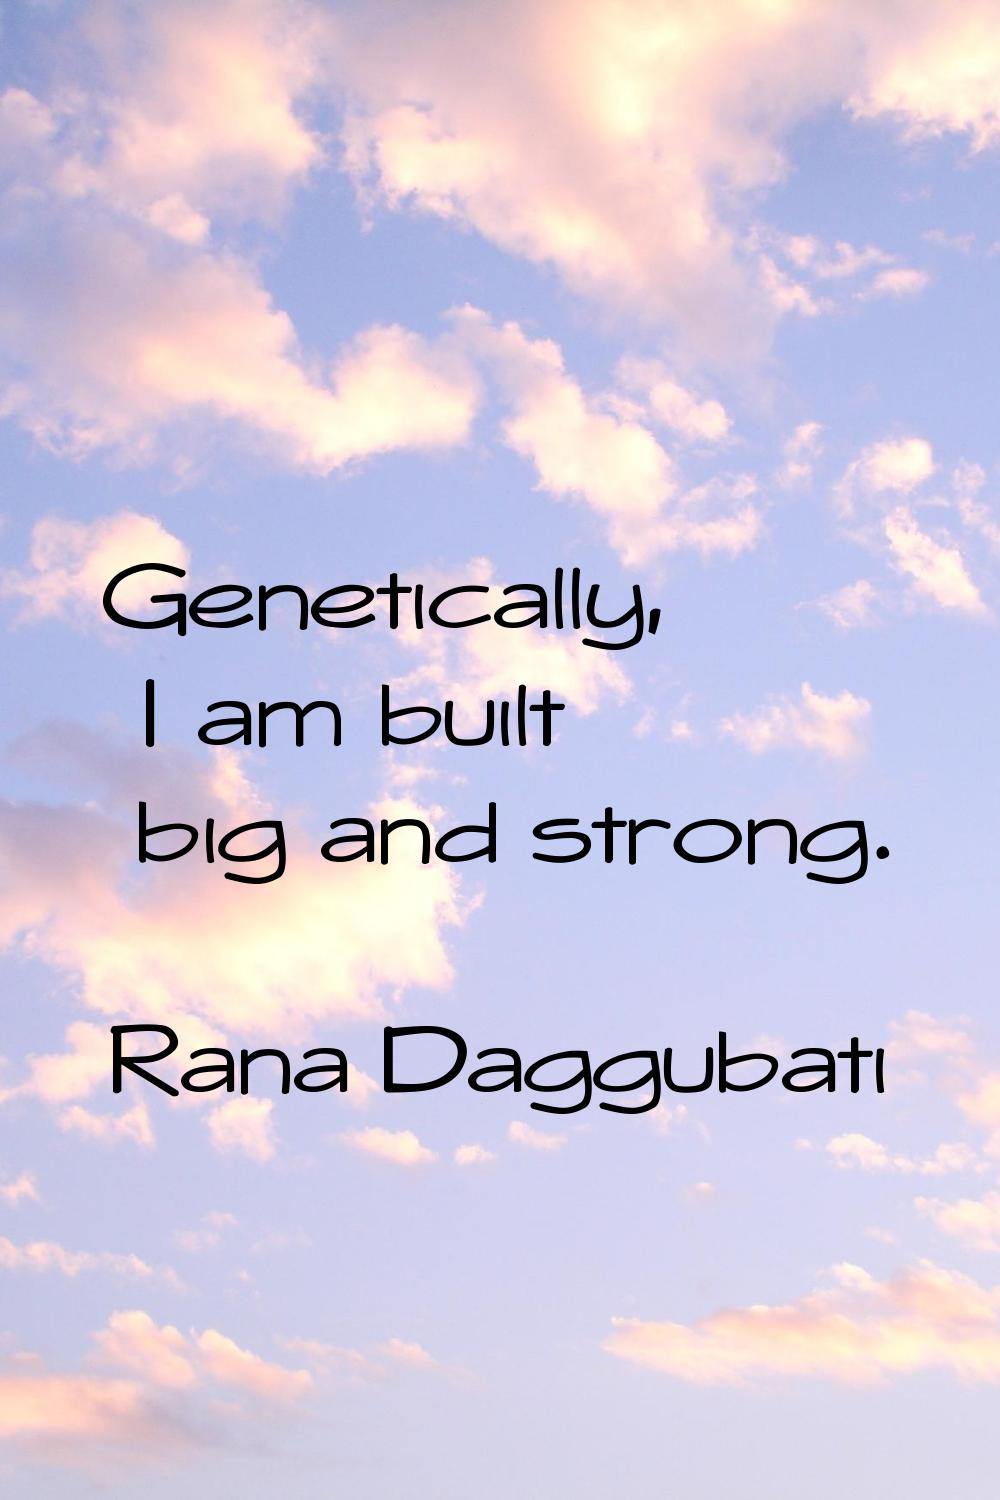 Genetically, I am built big and strong.